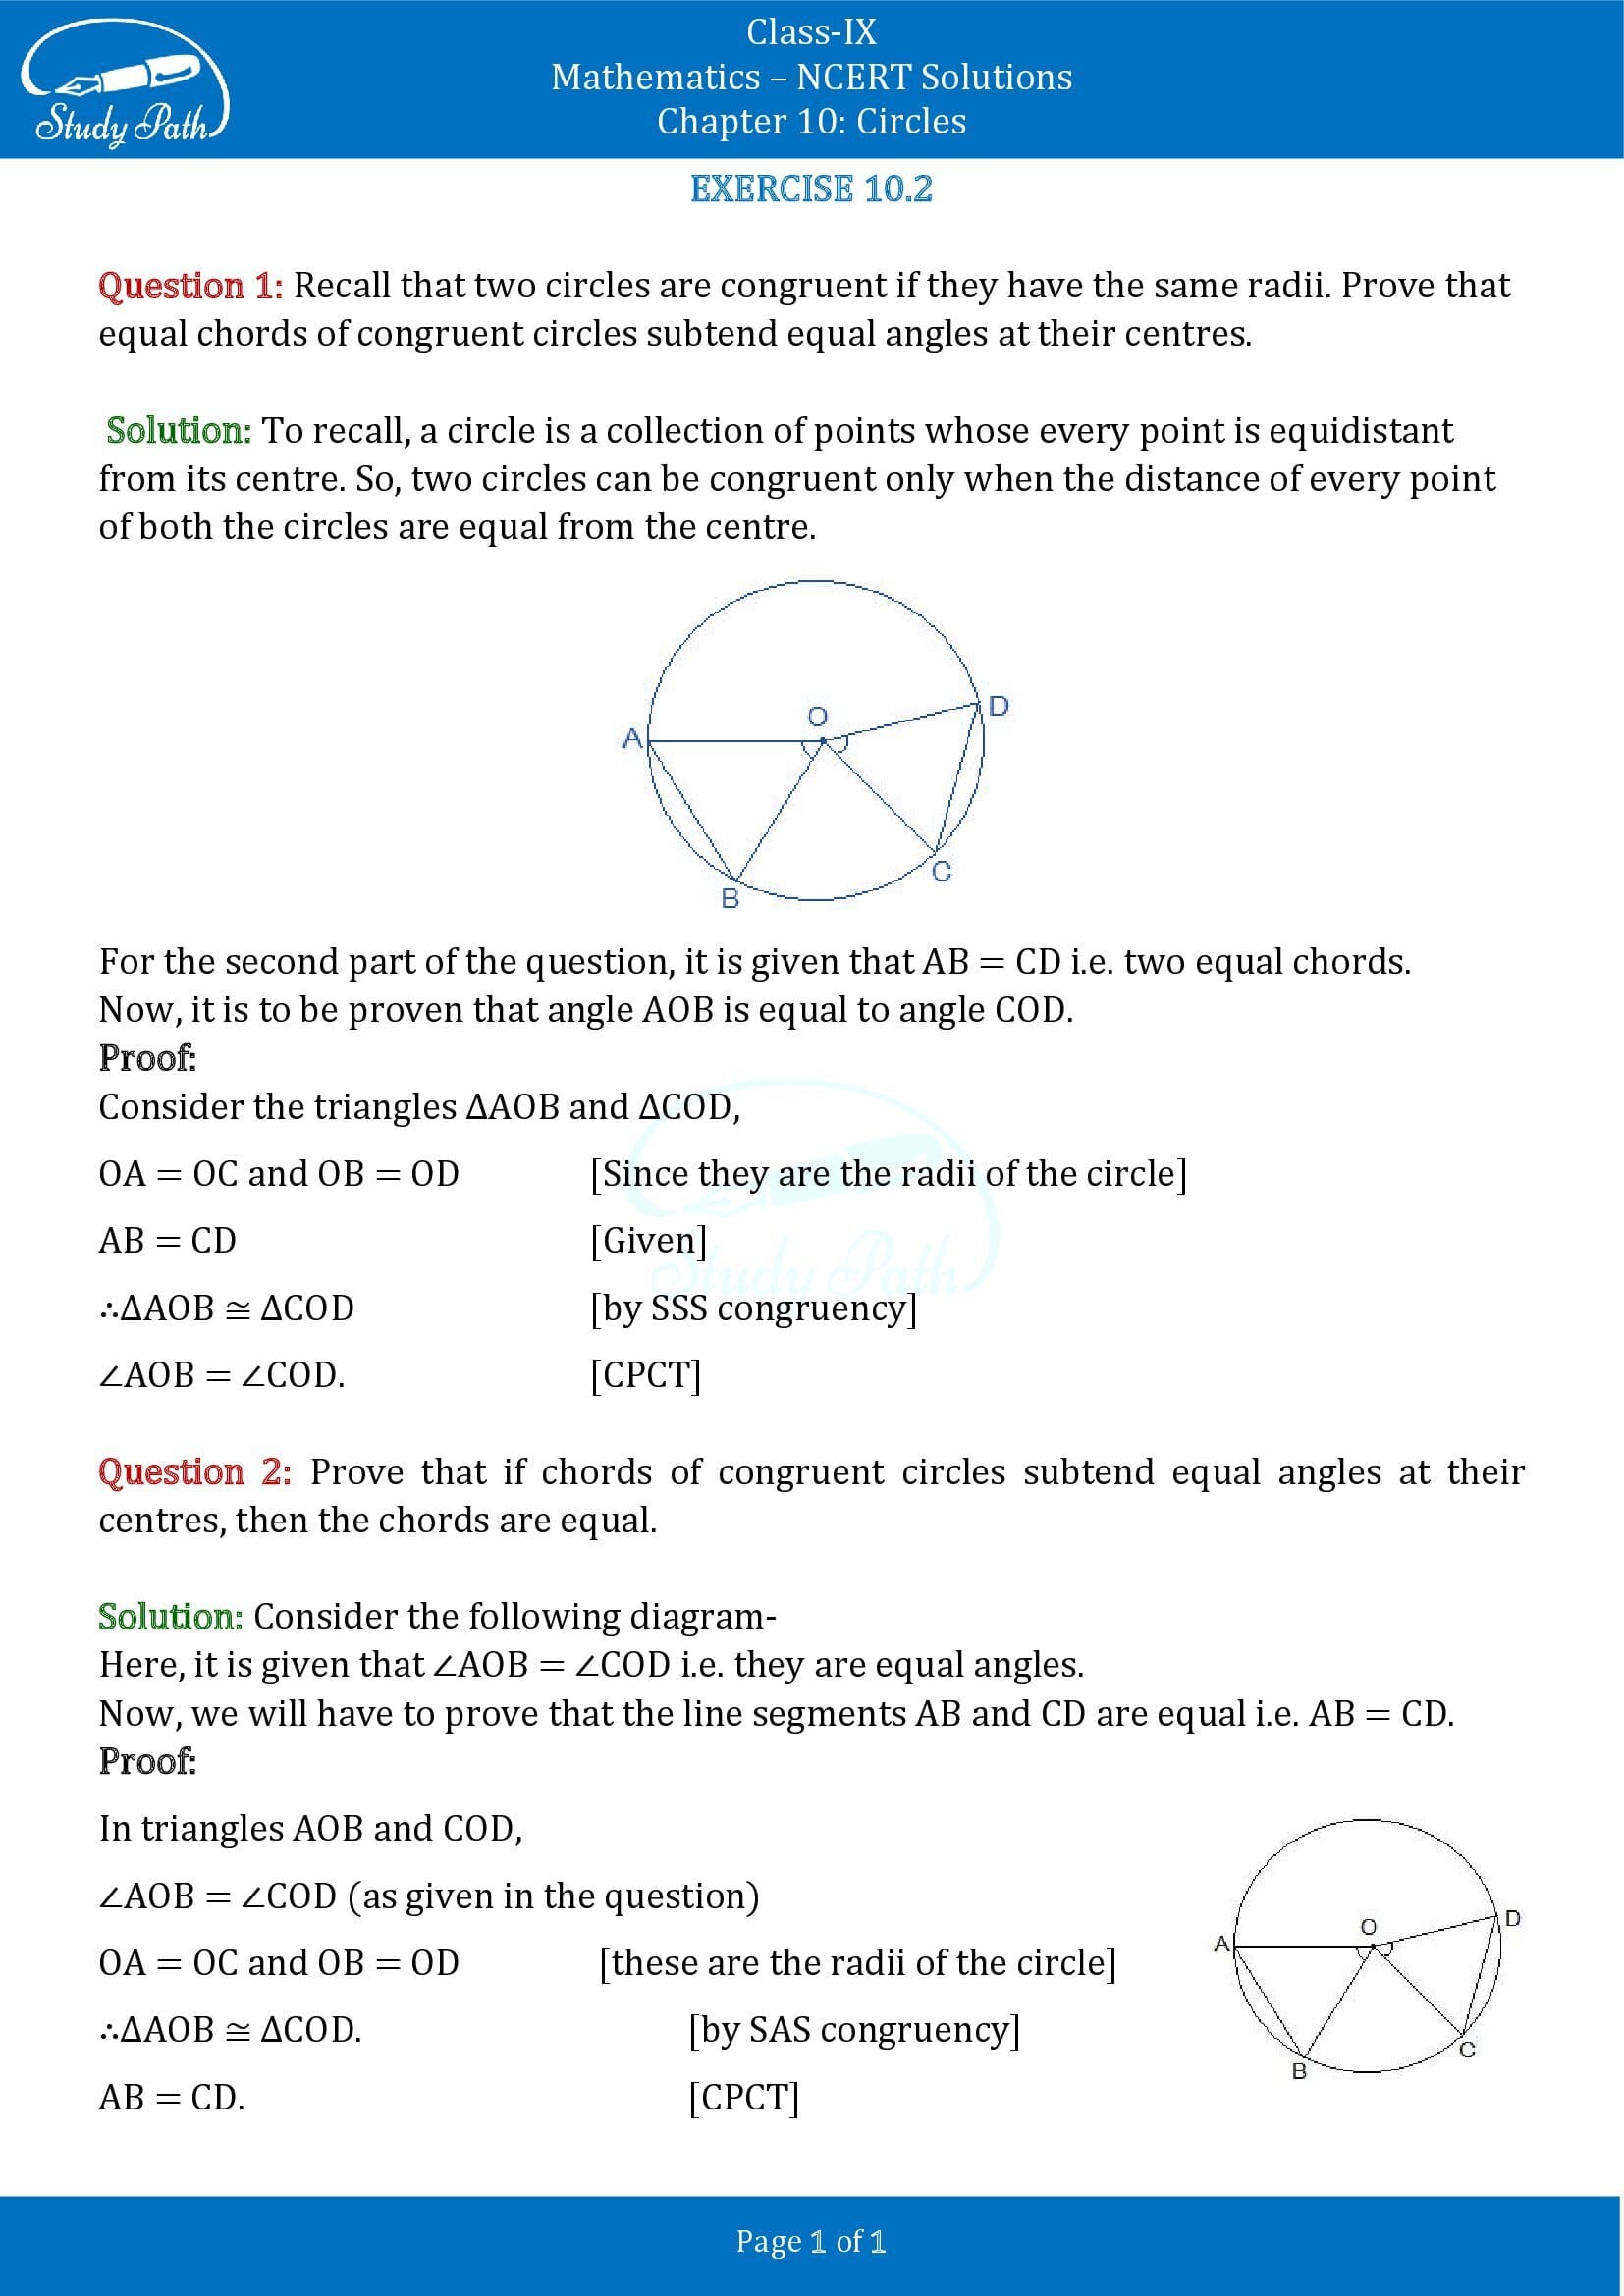 NCERT Solutions for Class 9 Maths Chapter 10 Circles Exercise 10.2